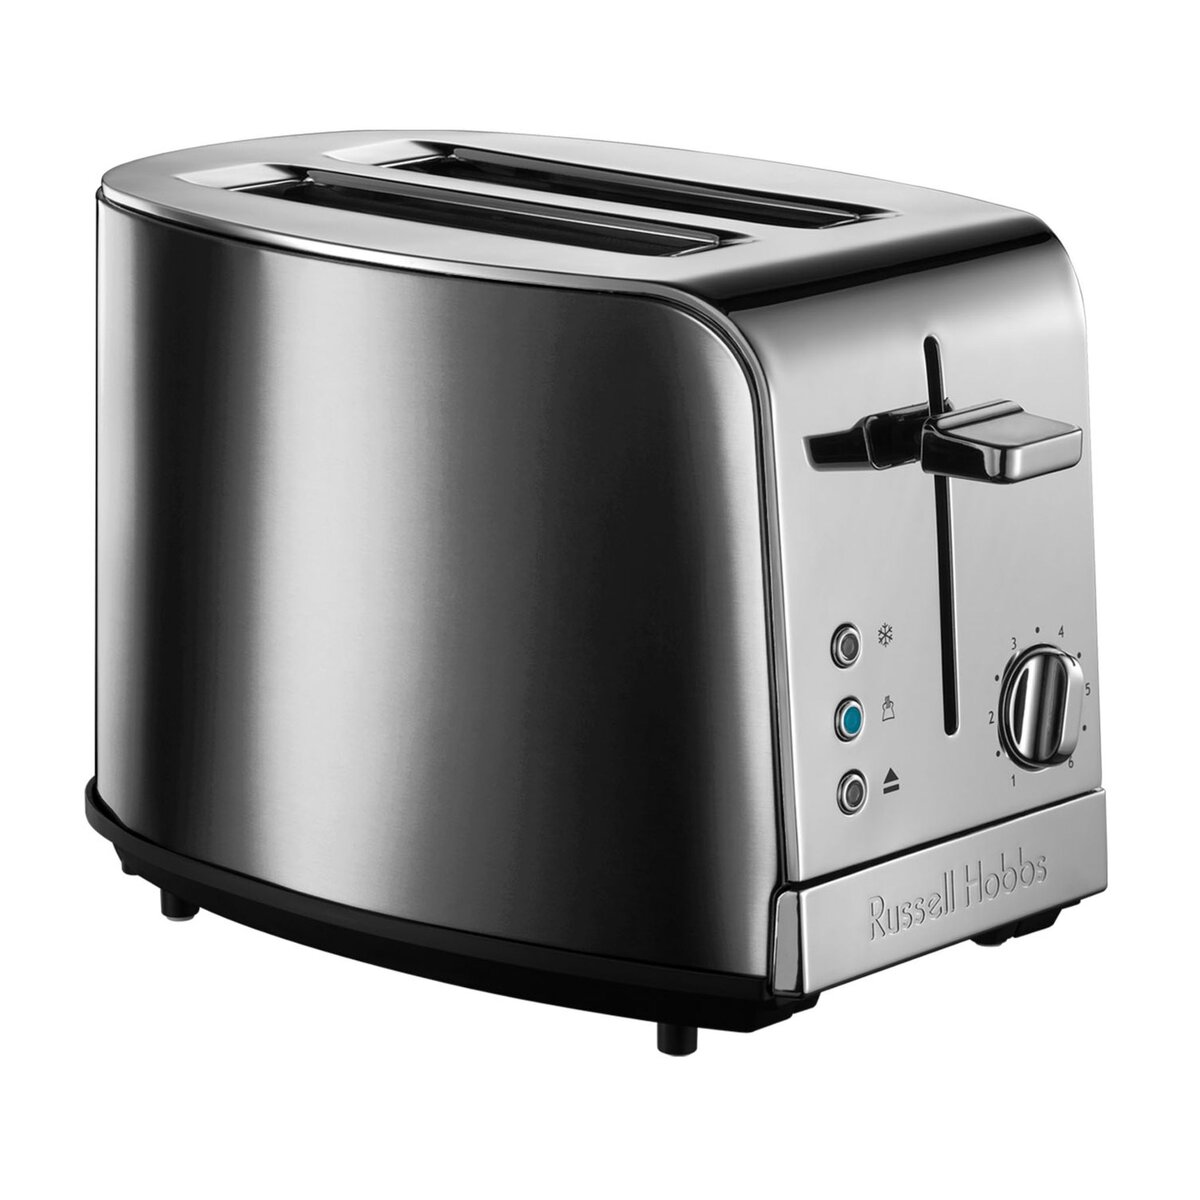 RUSSELLHOB Toaster 21782-56, Gris